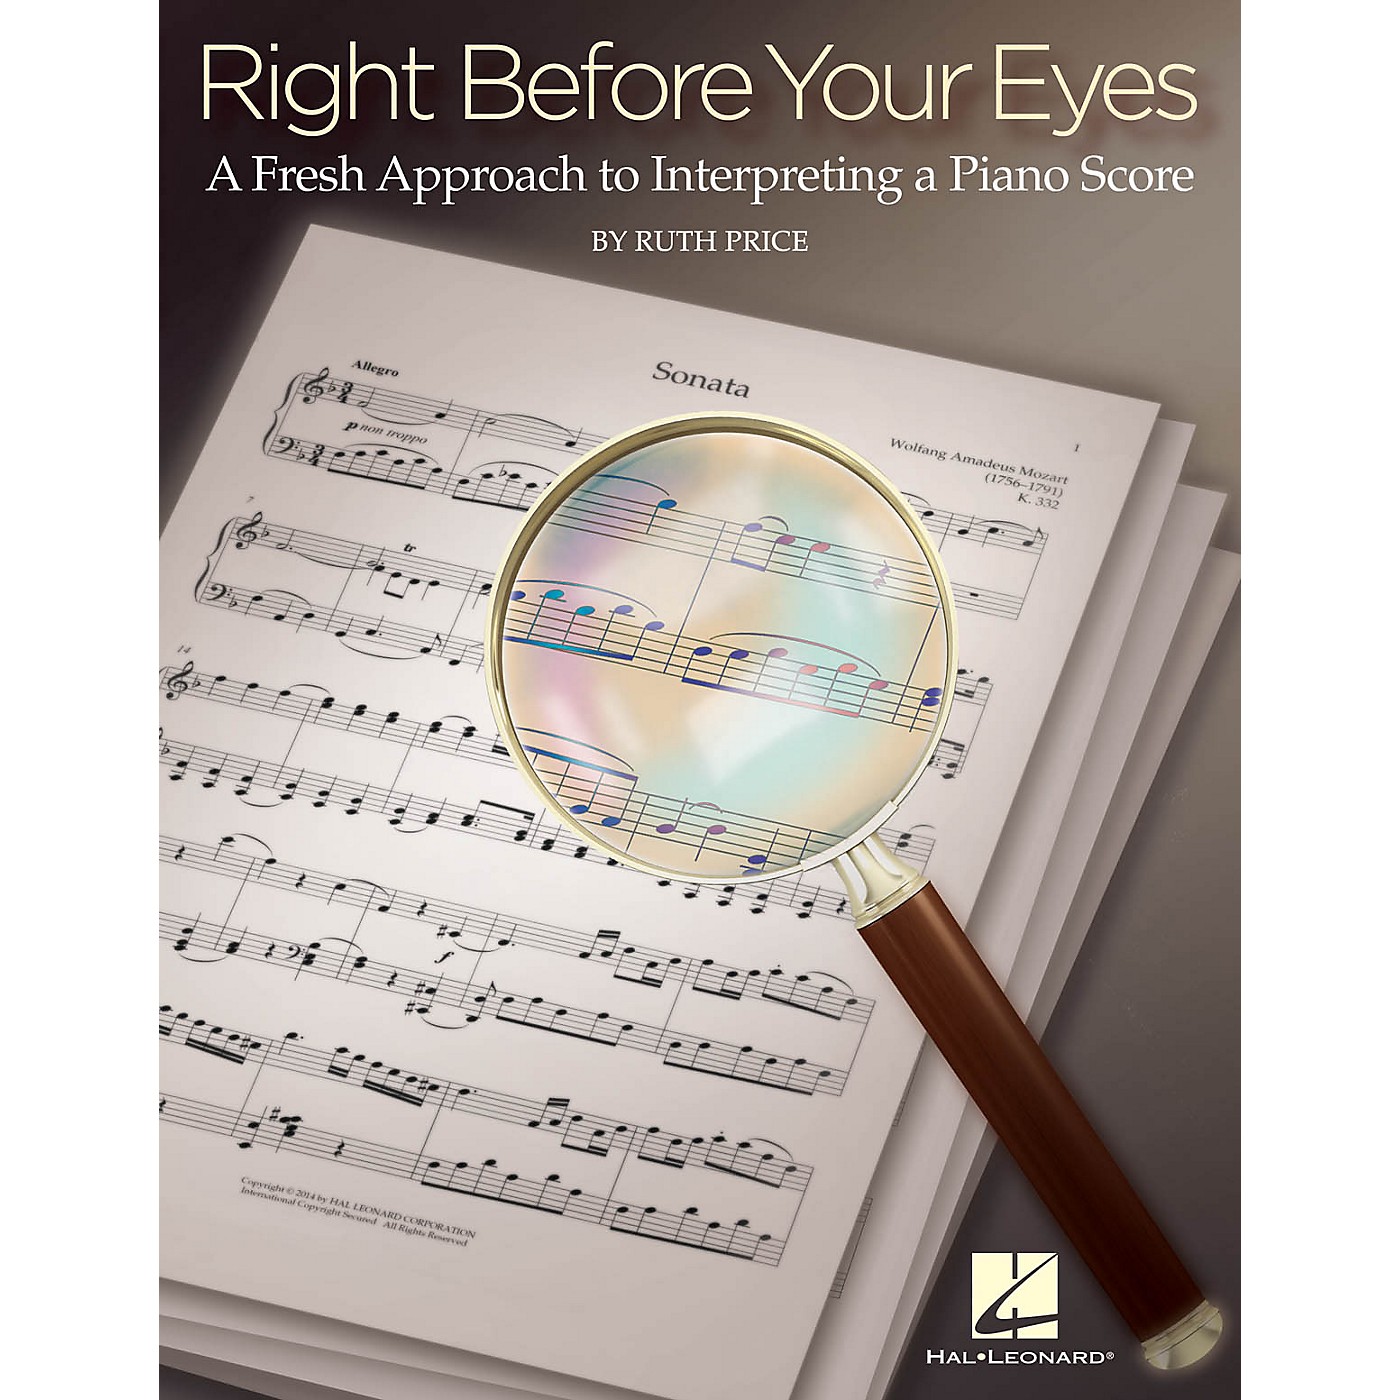 Hal Leonard Right Before Your Eyes Educational Piano Library Series Softcover Written by Ruth Price thumbnail